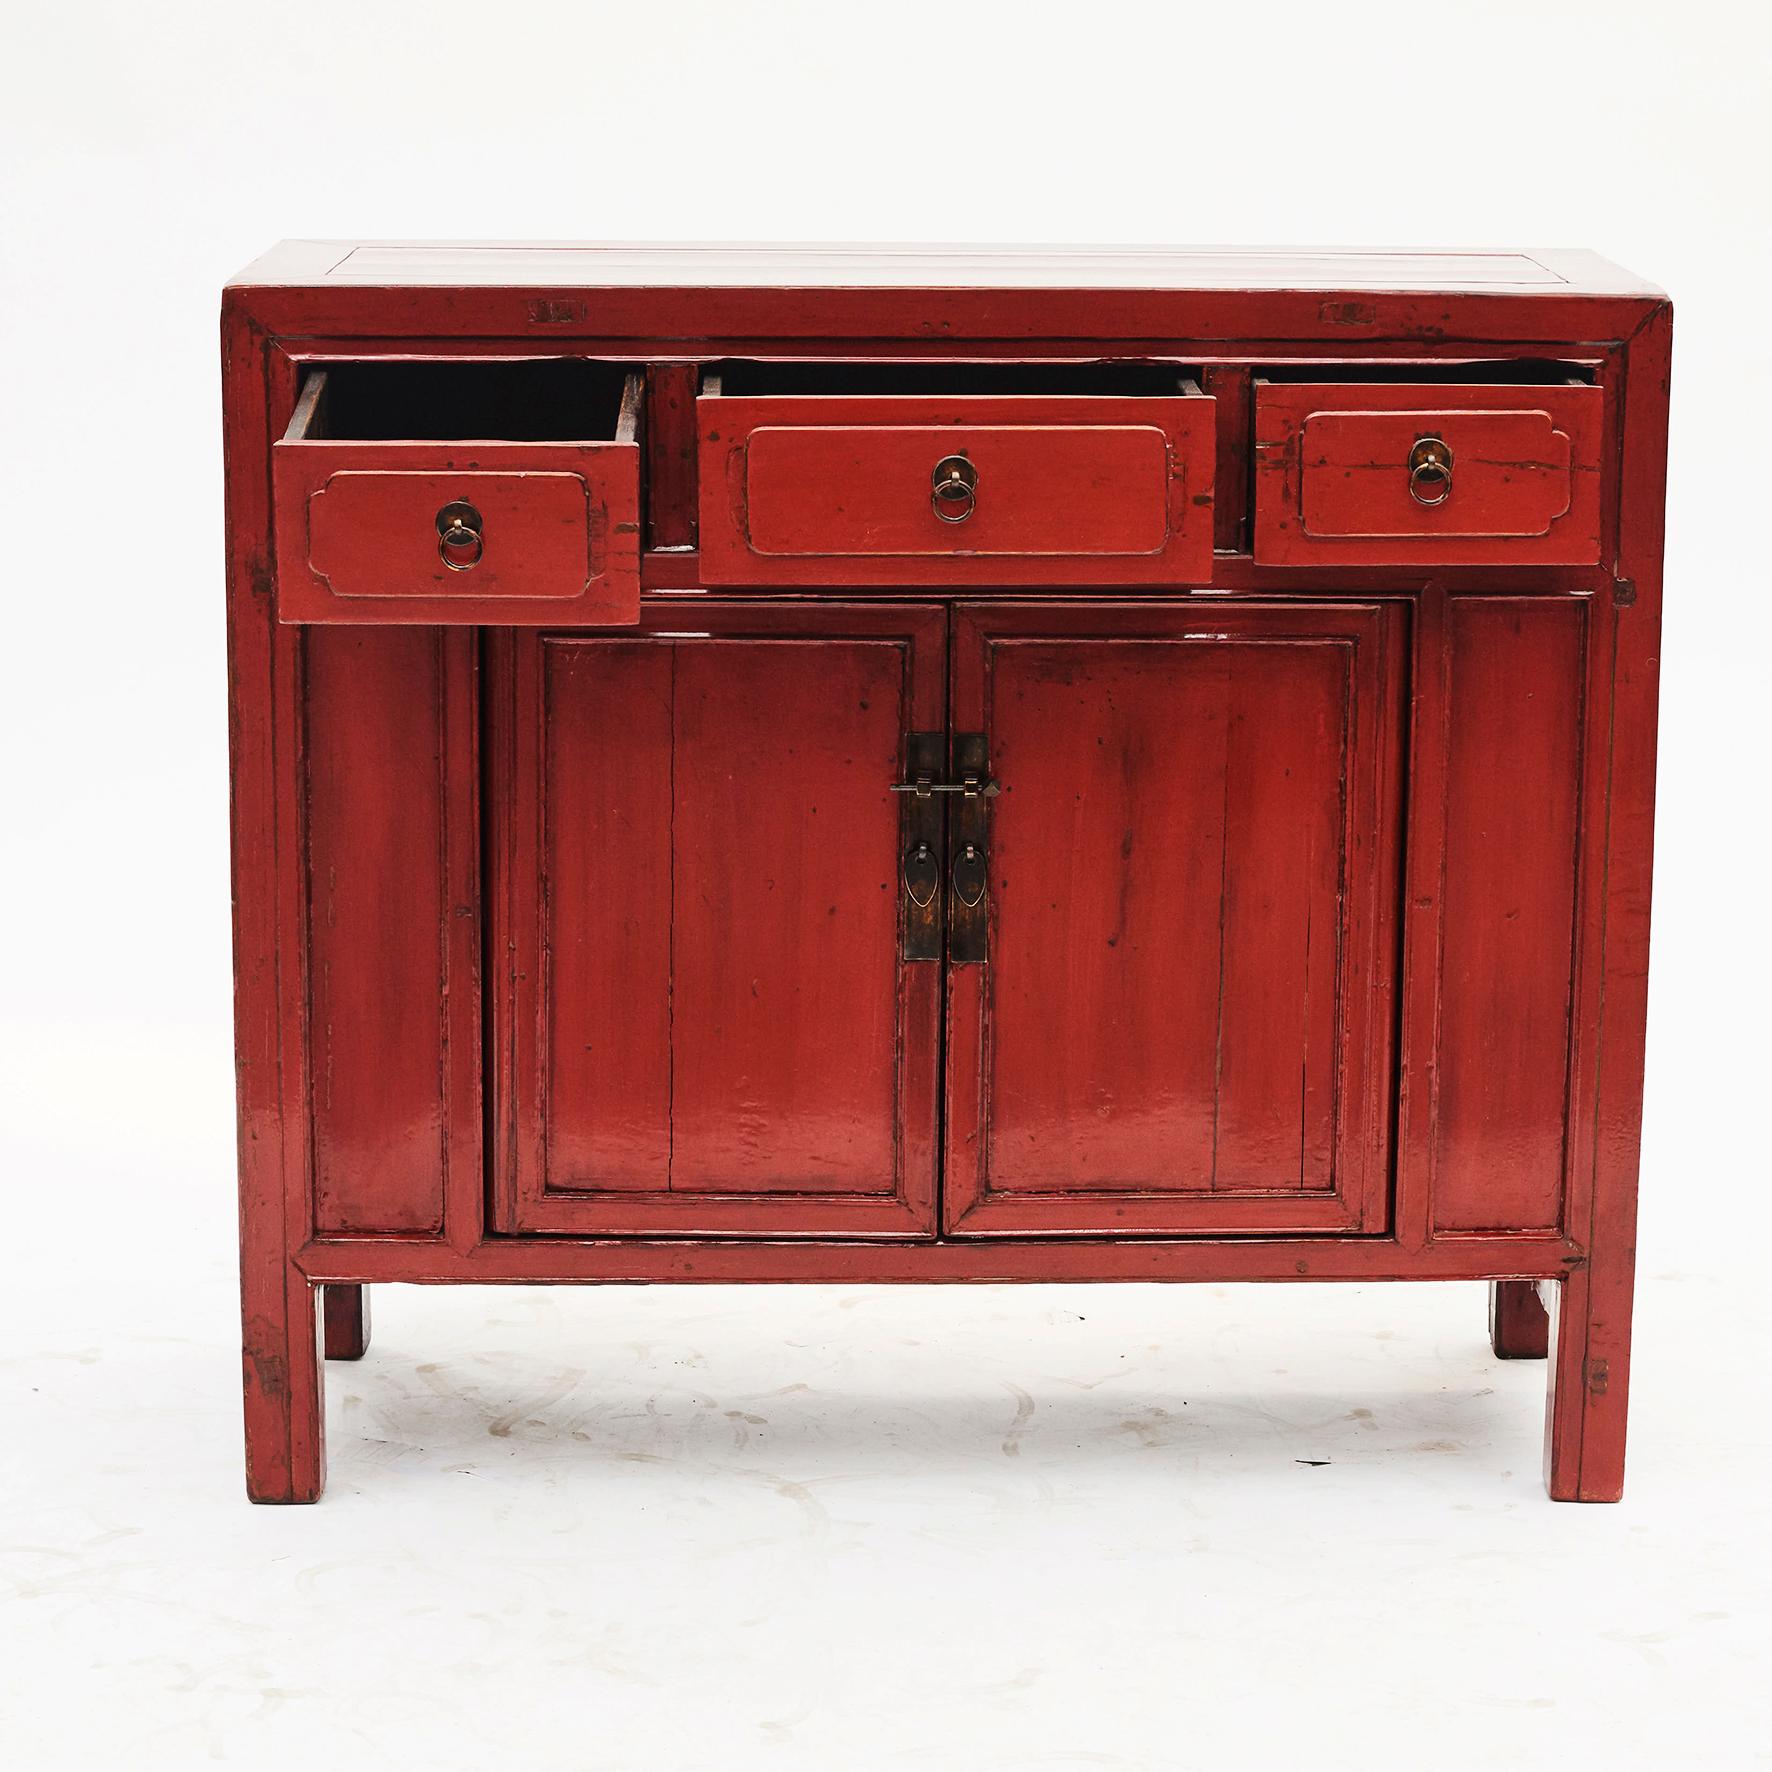 Antique basswood two-door cabinet with 3 drawers. Each drawer is adorned with ring pulls with circular back plates.
Original red lacquer. Natural patina and well-preserved lacquer color.
Jiangsu Province, China, circa 1880.